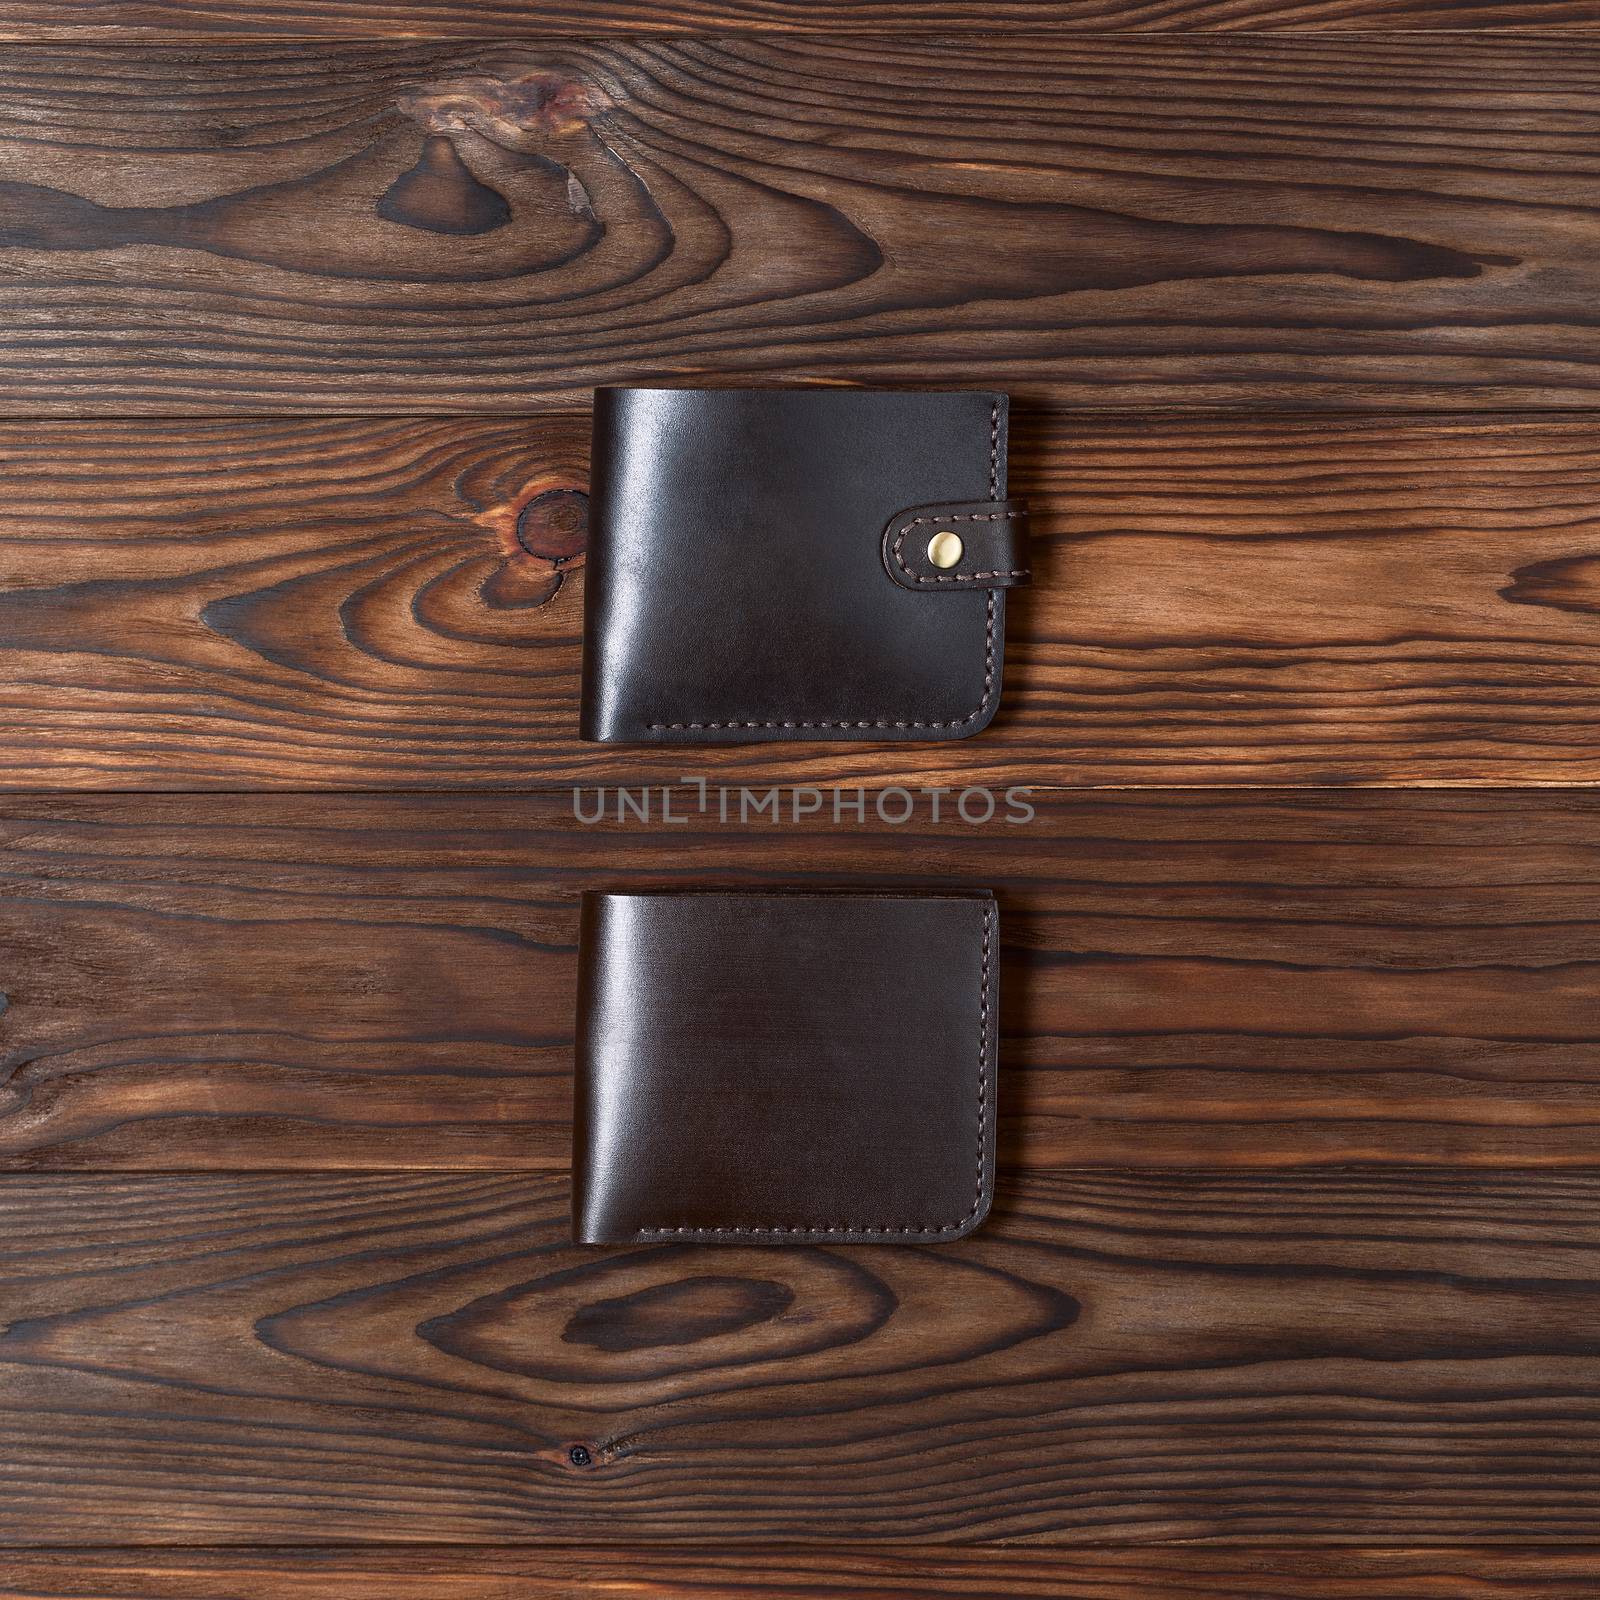 Brown handmade leather gloss wallets on wooden textured background. Up to down view. Businessman wallet stock photo.